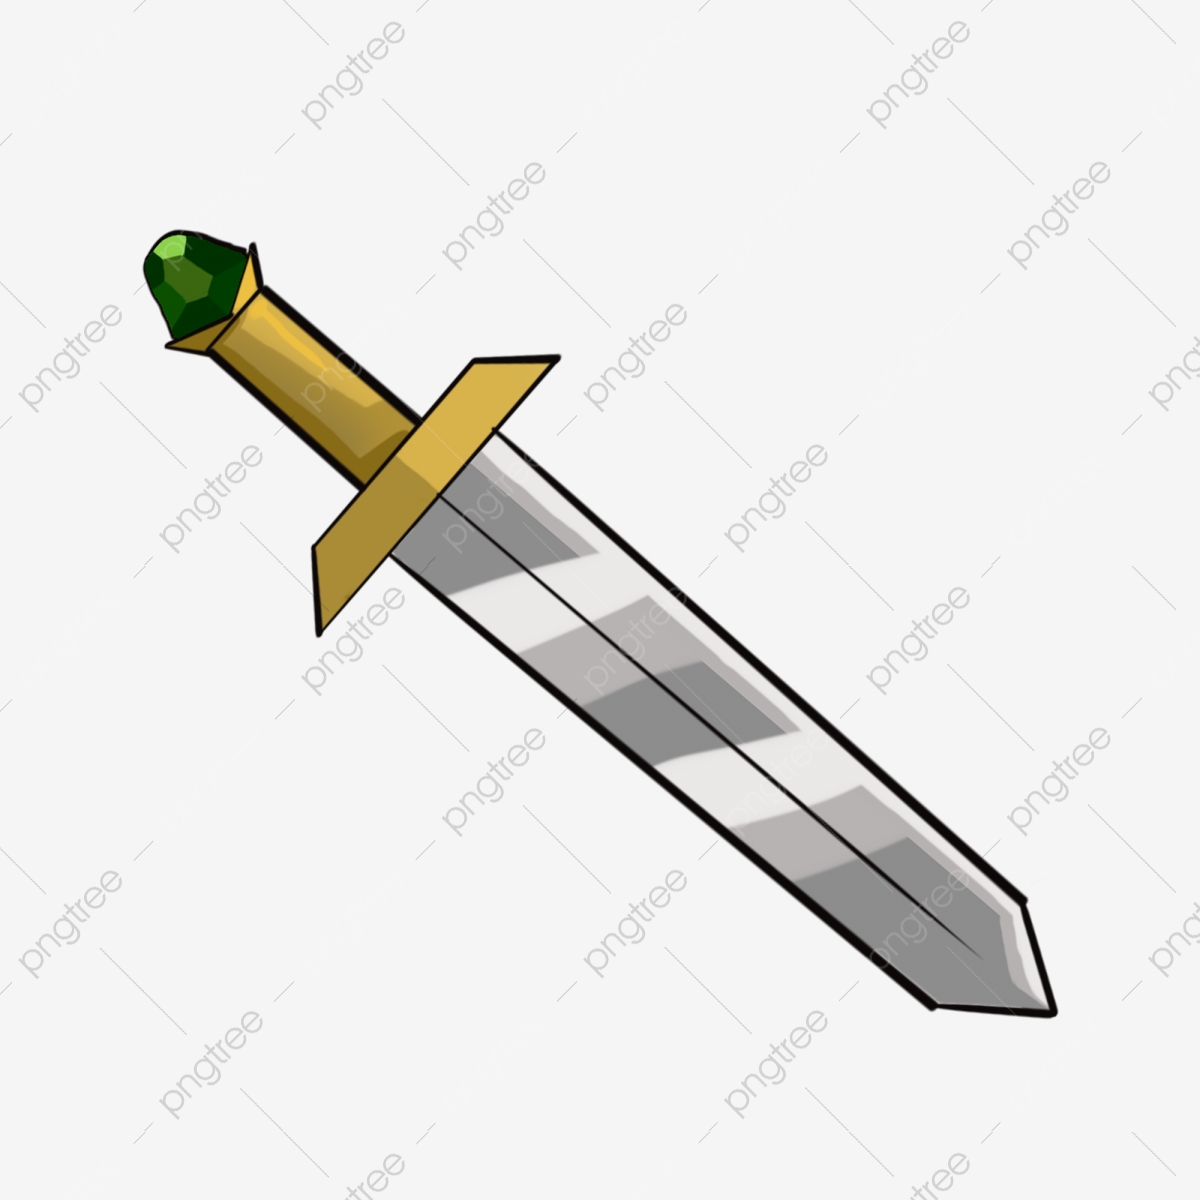 sword clipart toy